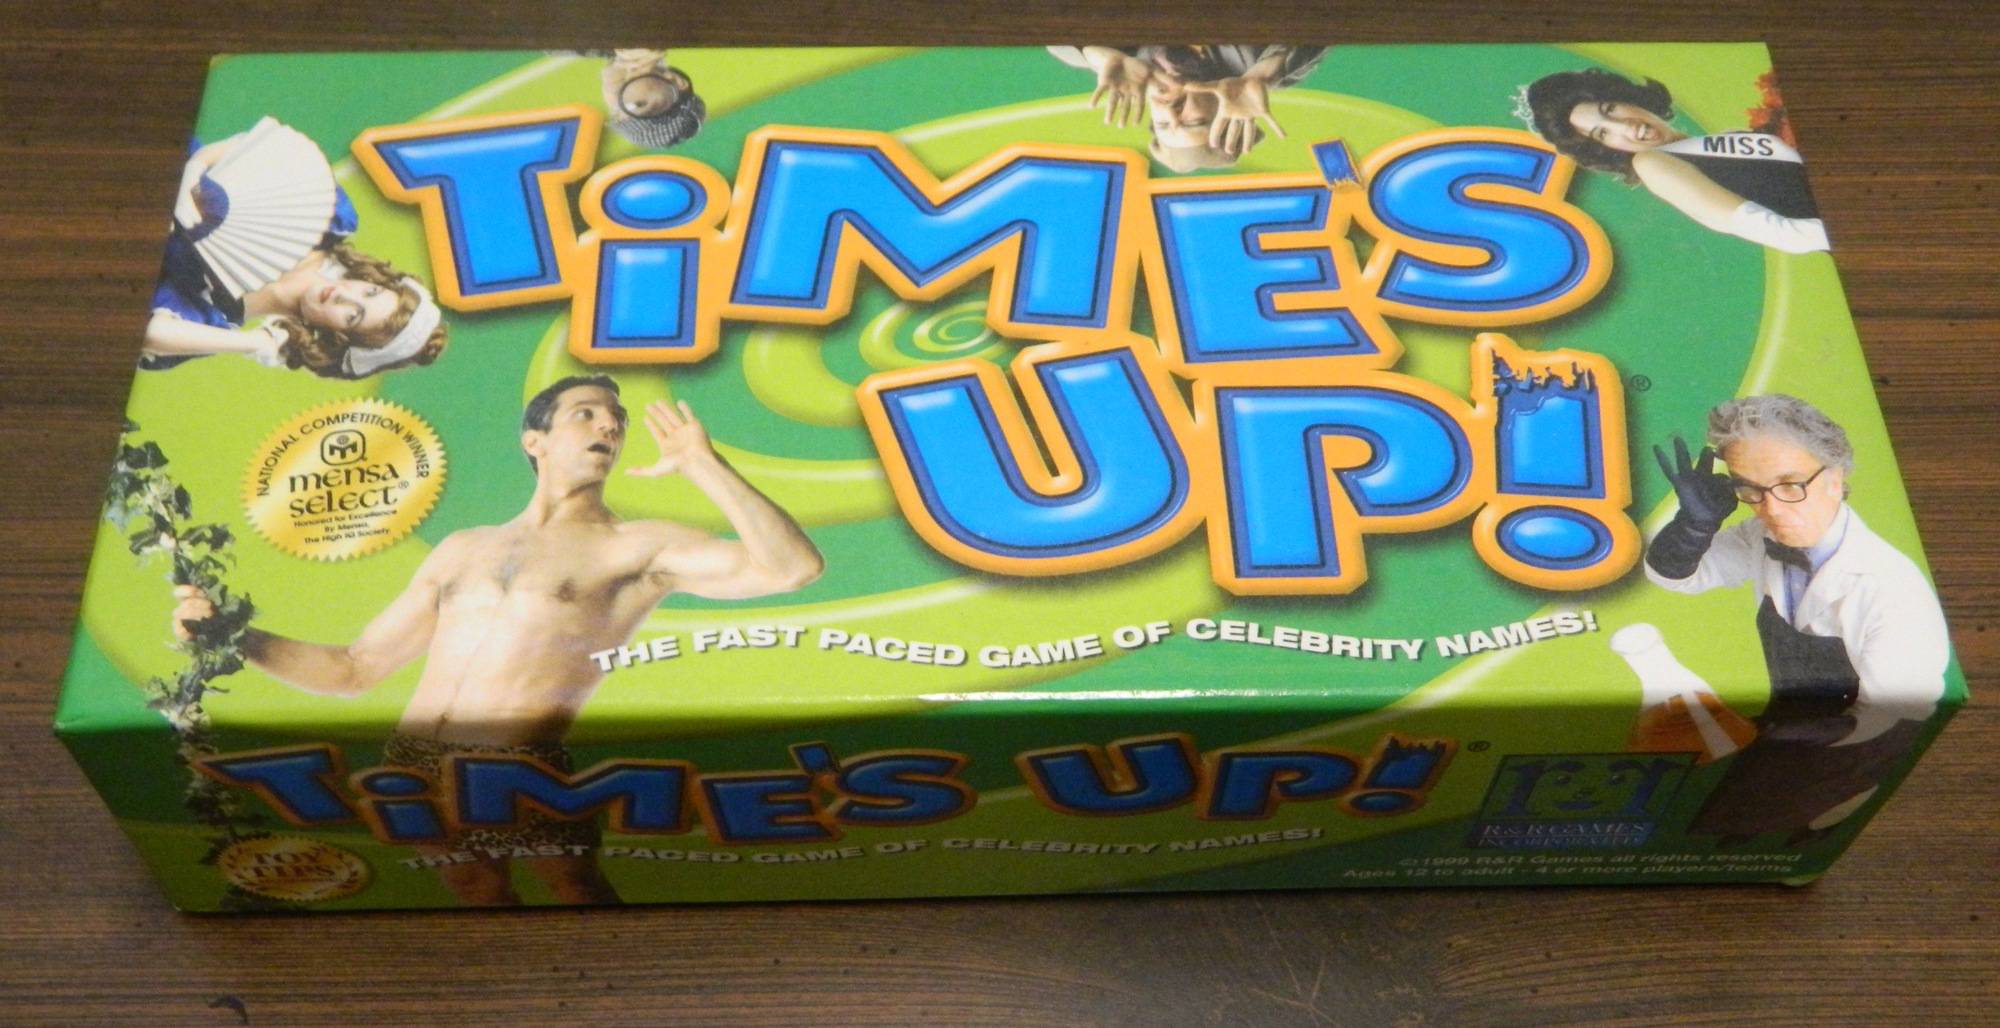 Time’s Up! AKA Celebrities Board Game Review and Rules